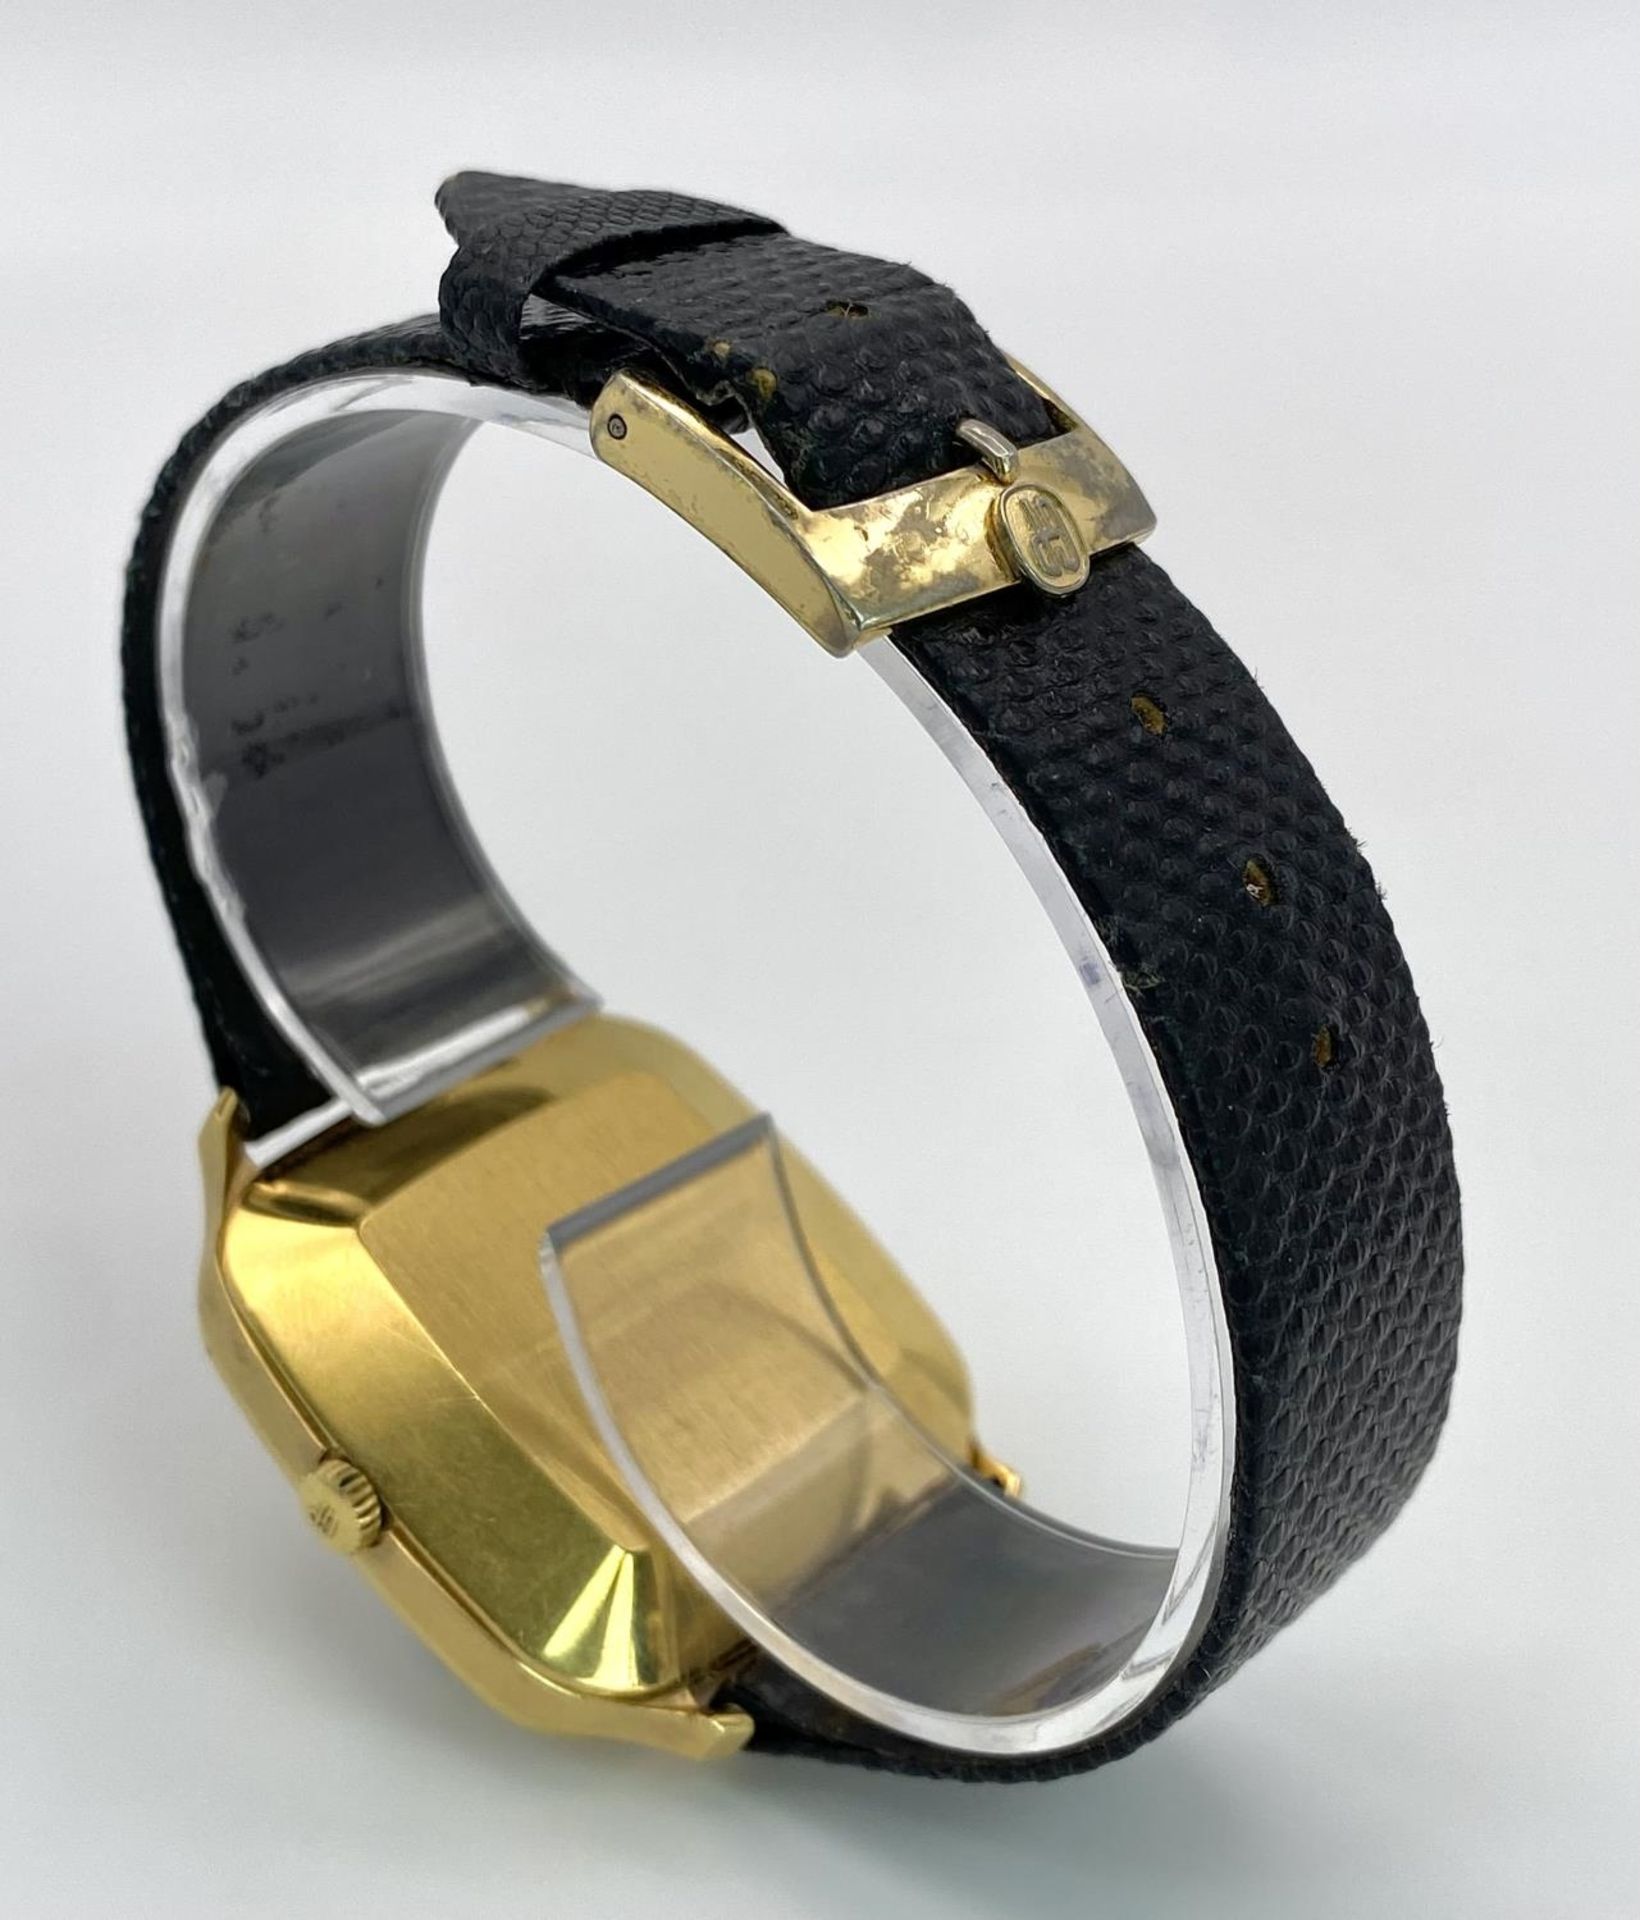 A Girard Perregaux Gold Plated Gyromatic Gents Watch. Black leather strap. Gold plated case - - Bild 6 aus 6